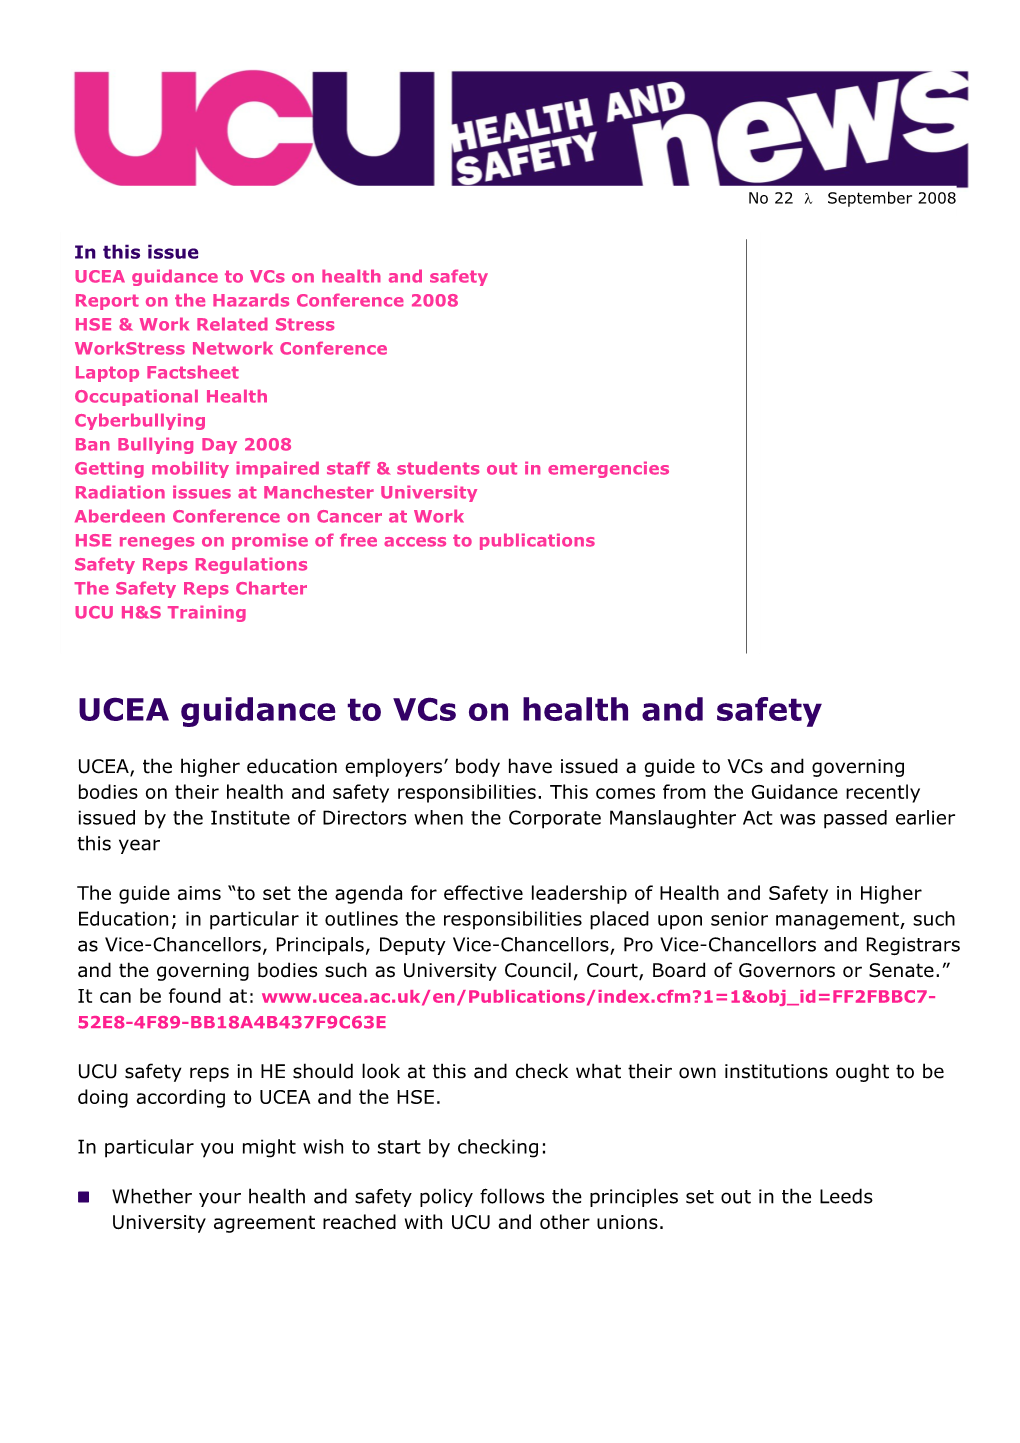 UCEA Guidance to Vcs on Health and Safety